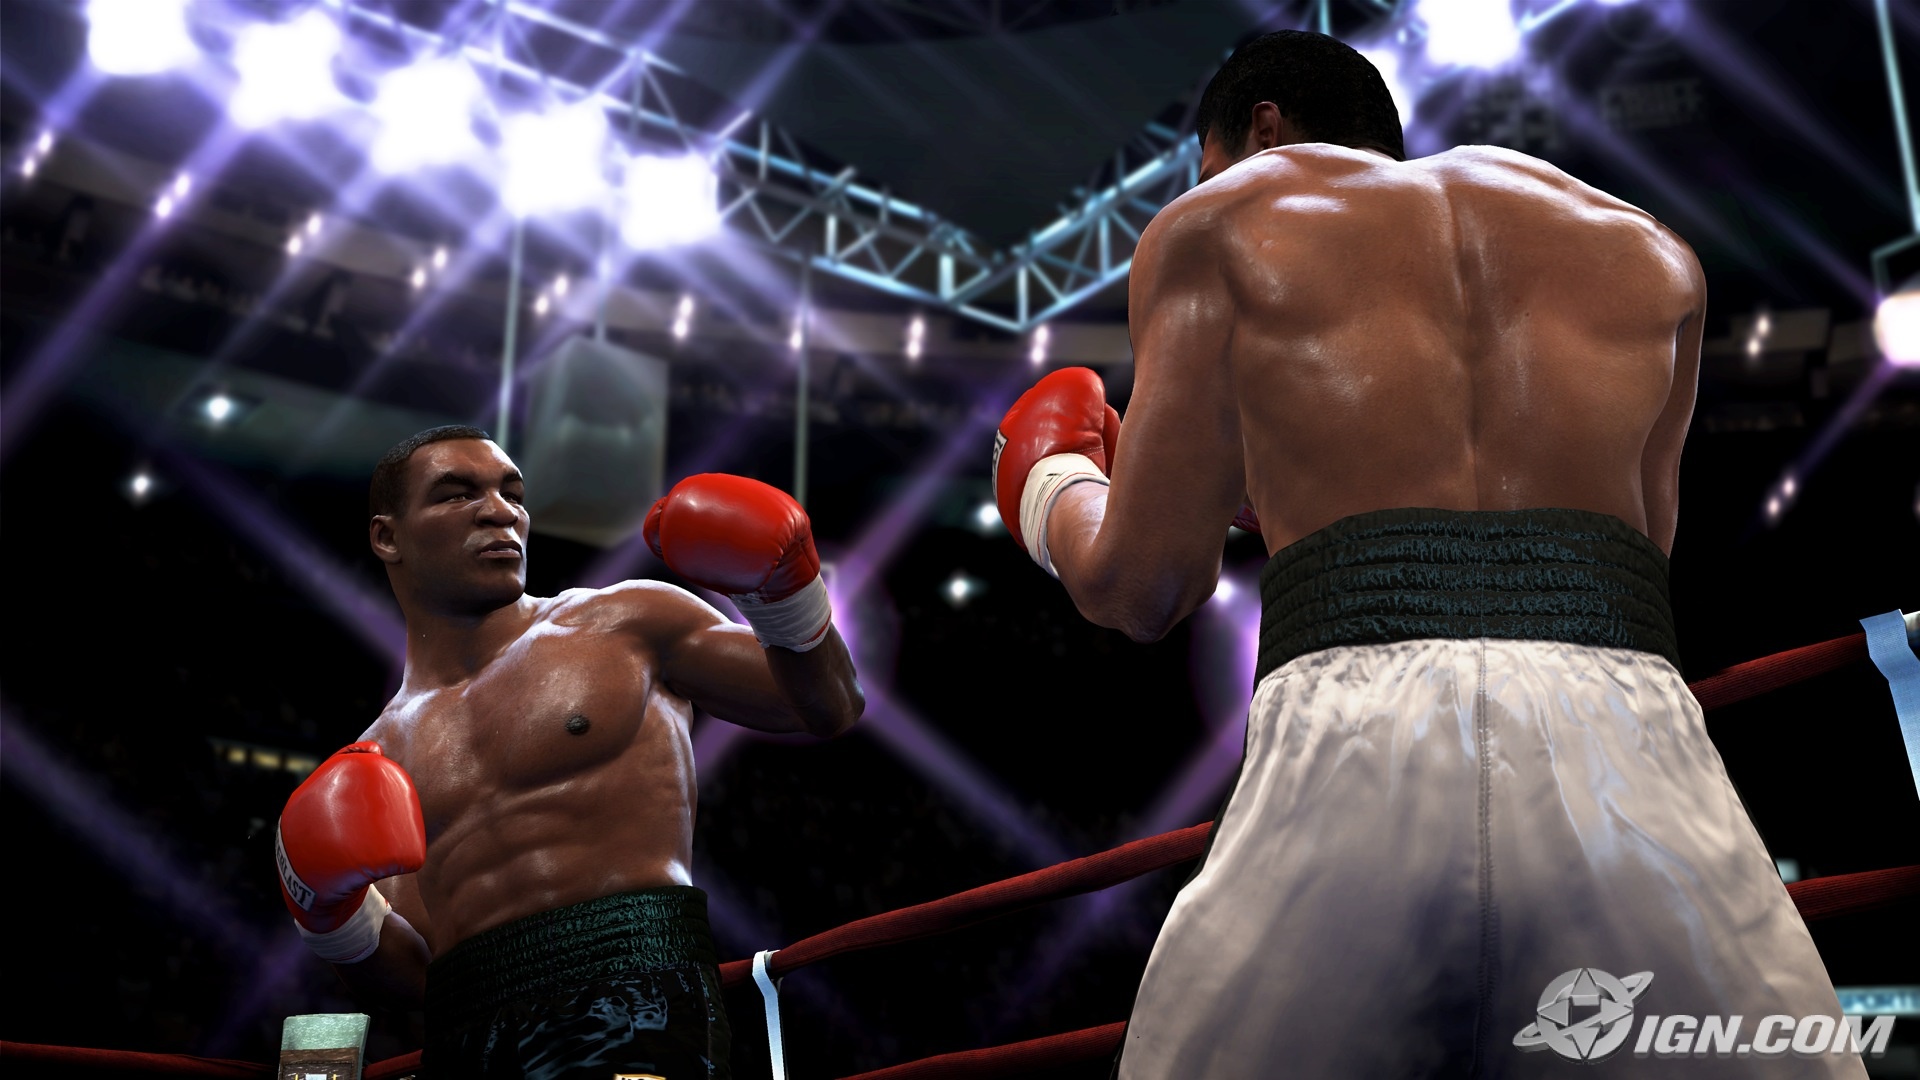 Untitled boxing game hawk. Fight Night Round 4. Fight Night Round 4 Тайсон. Fight Night 4 игра. Fight Night Round 4 (ps3).